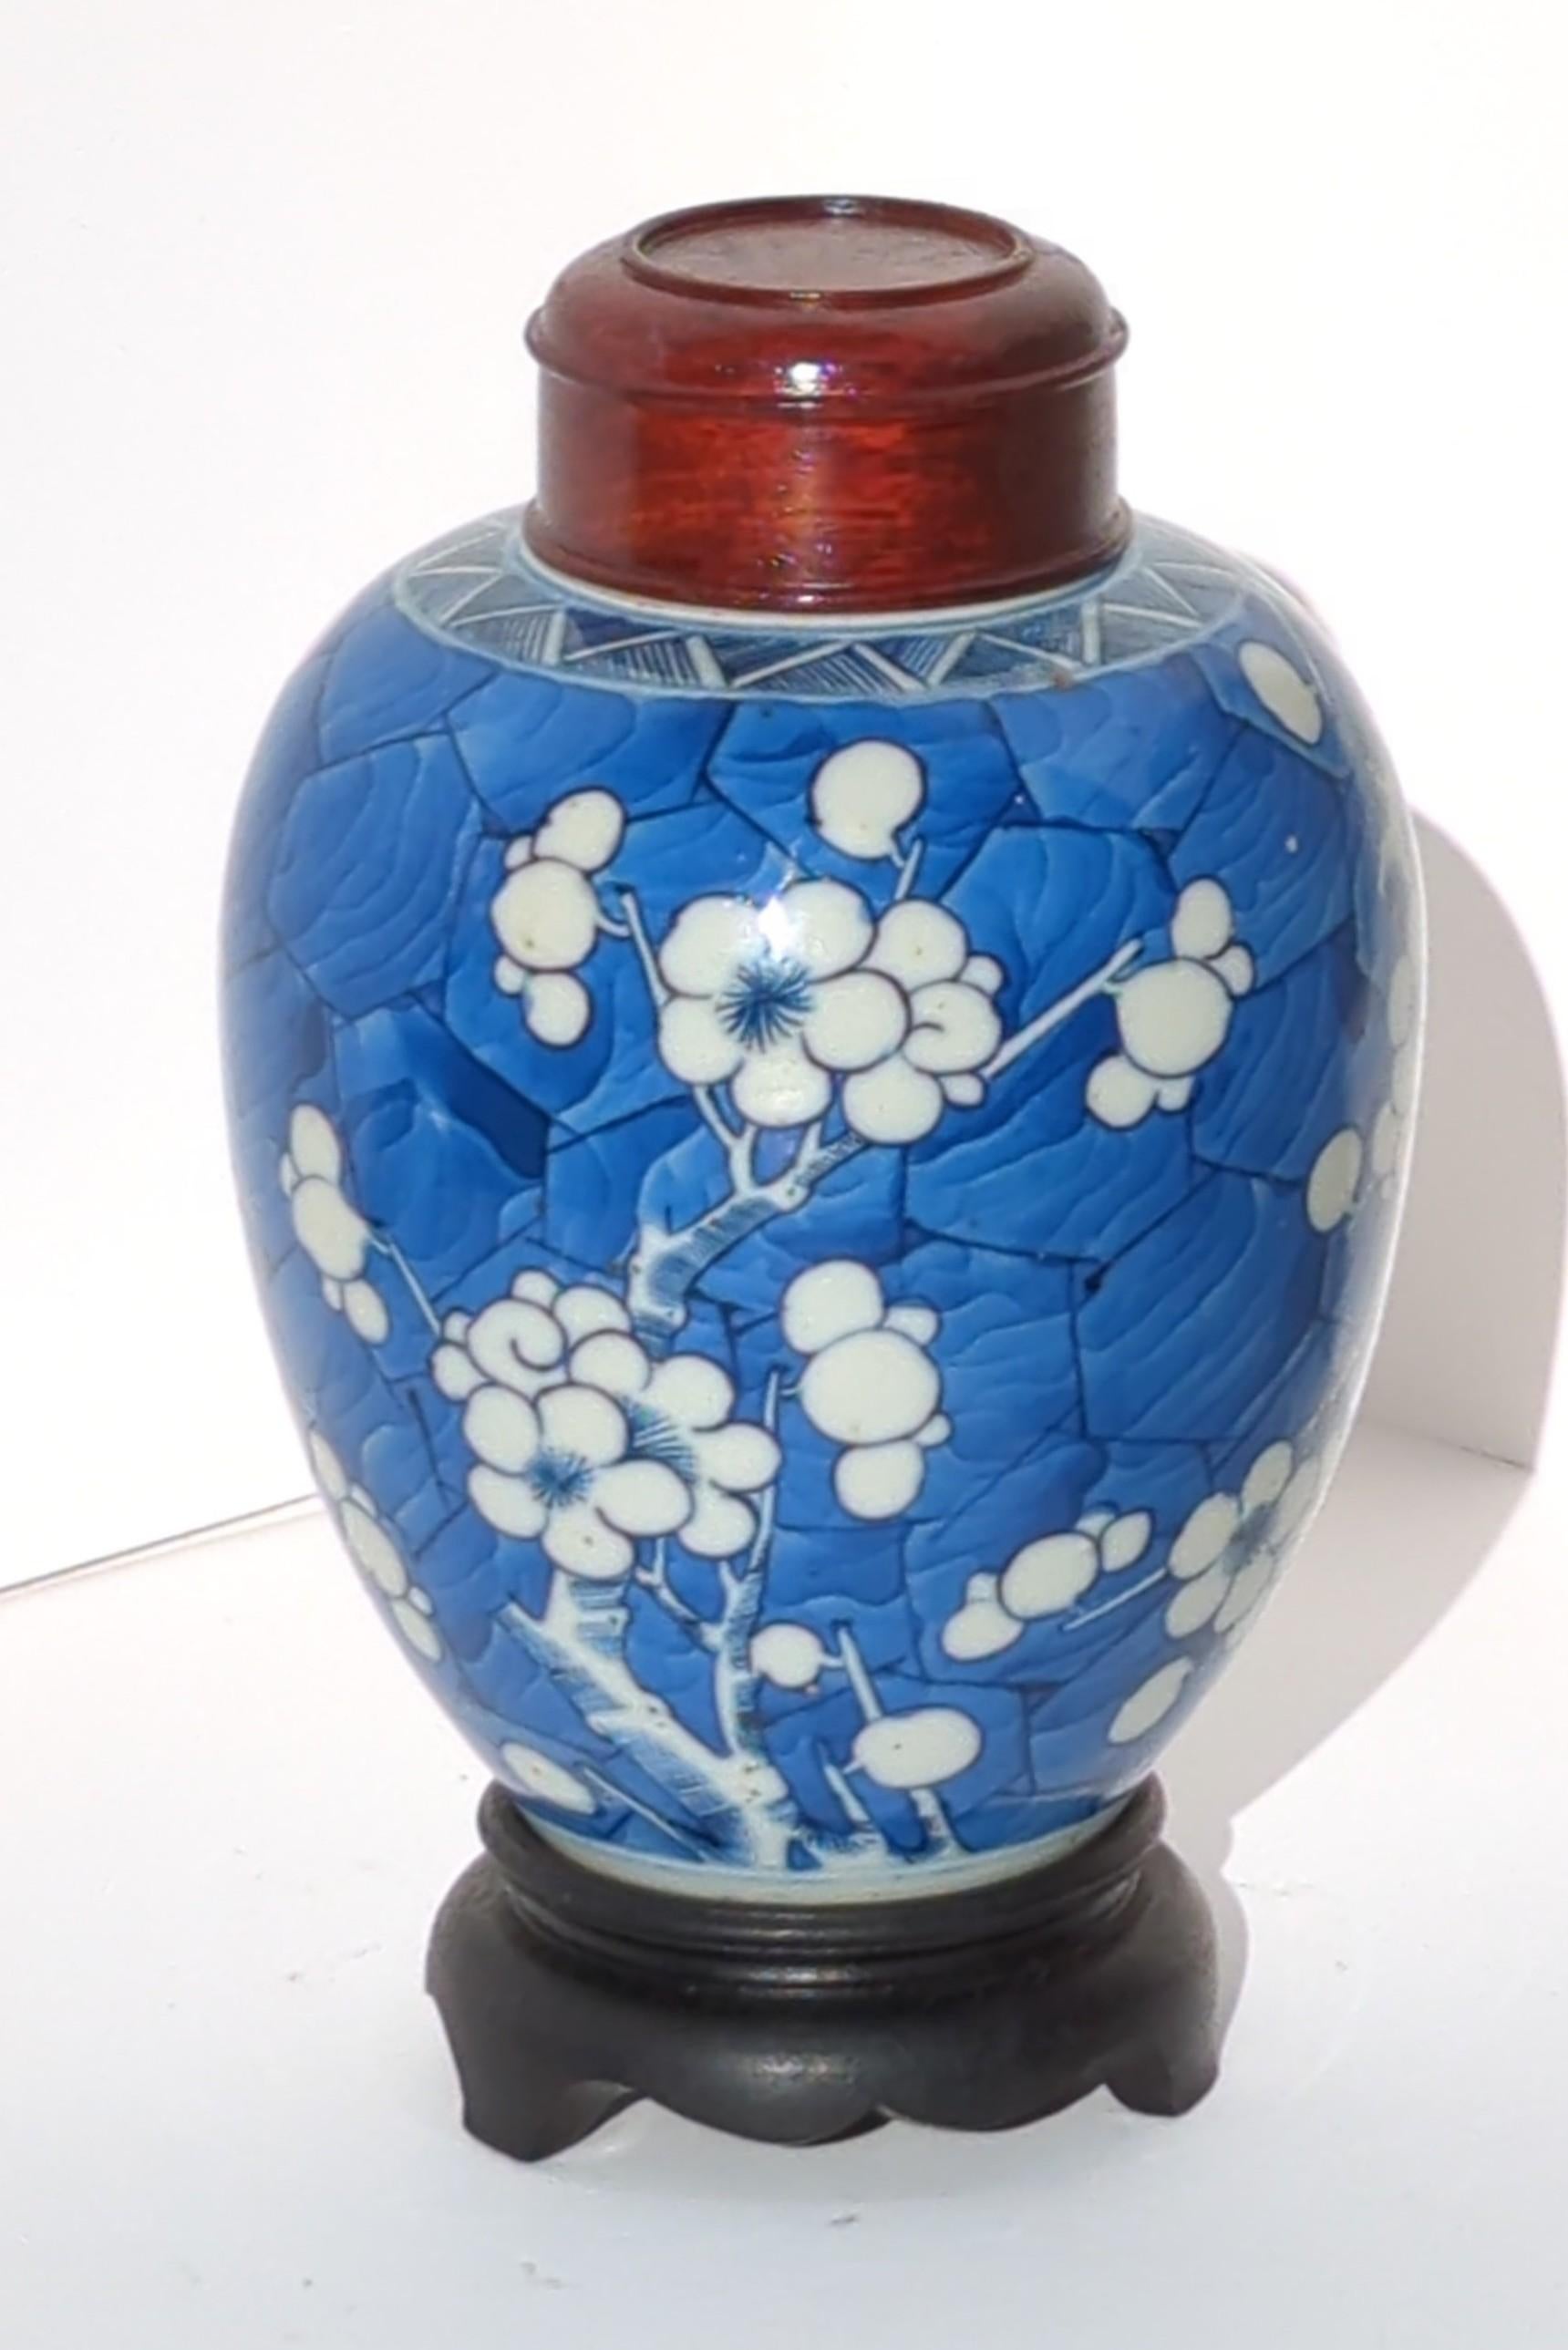 Antique Chinese Qing Dynasty Kangxi period blue and white ovoid ginger jar, finely hand painted in underglaze blue and white, with reserve blooming prunus branches on hawthorn style, underglaze cobalt blue wash ground, and double circle mark in